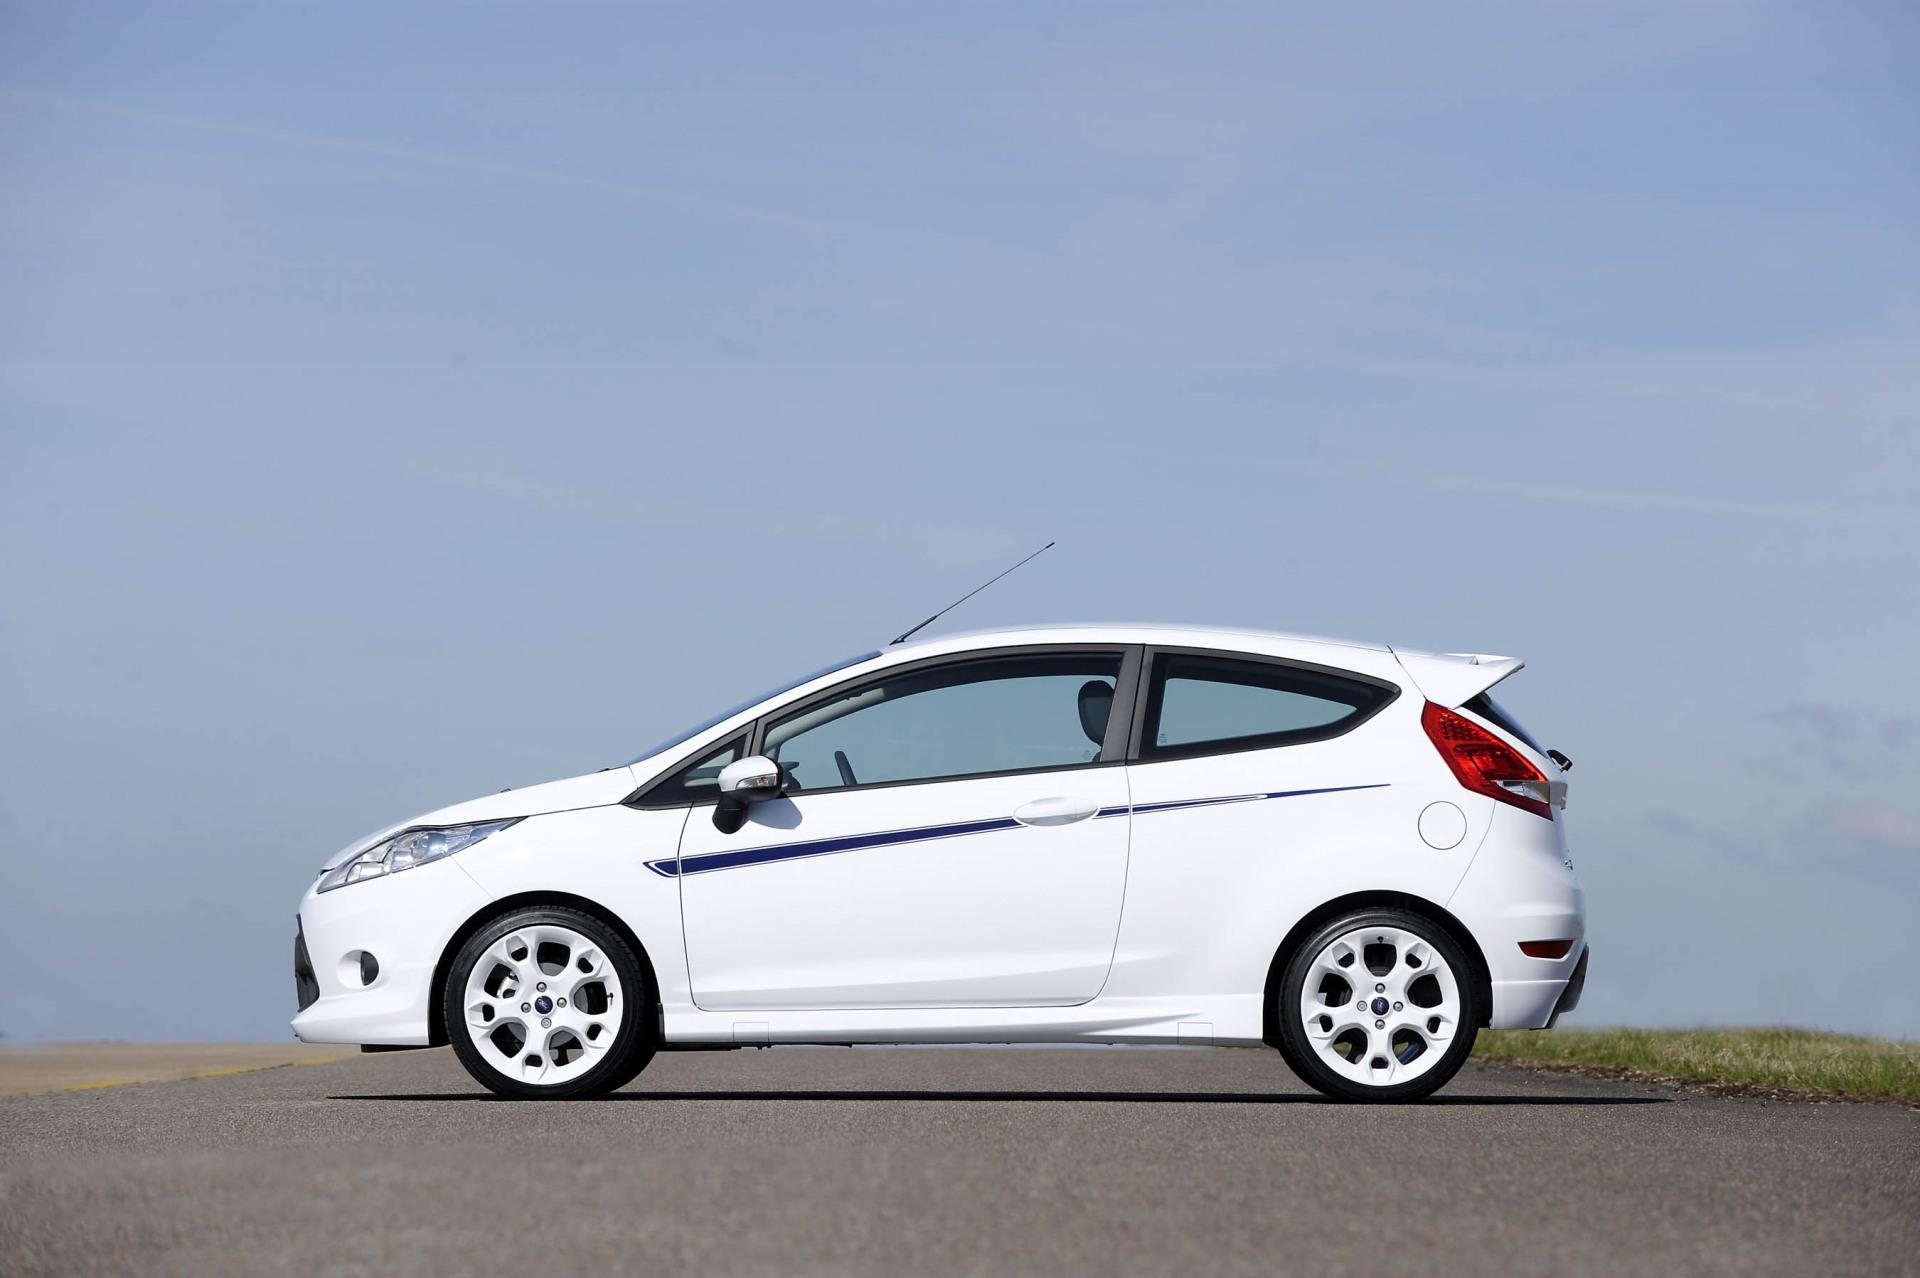 2011 Ford Fiesta S1600 News and Information .com